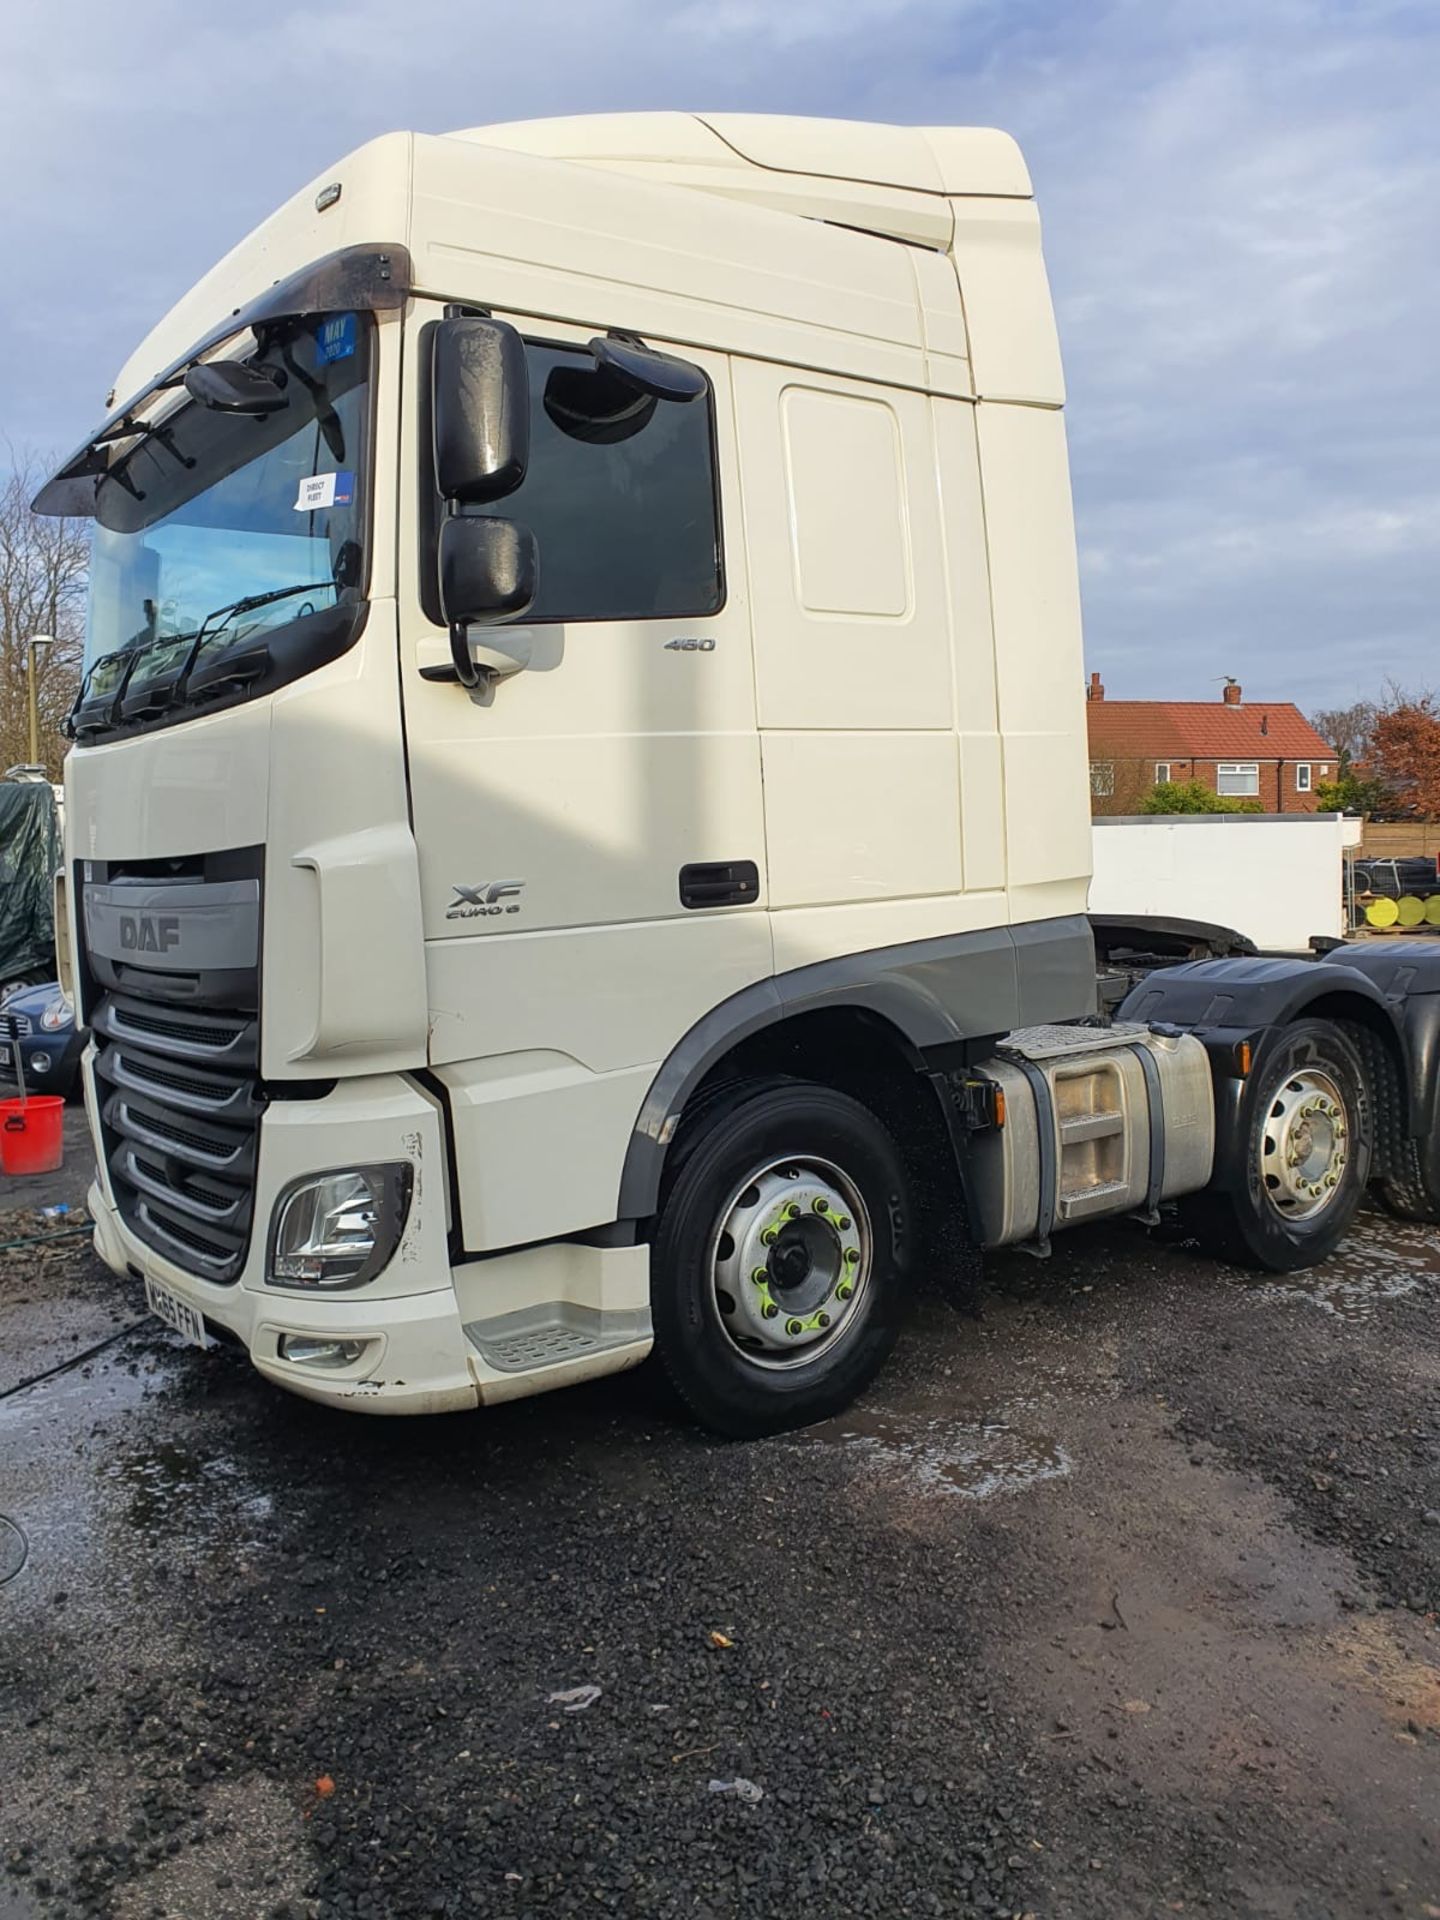 2016 (65) DAF XF106 460 SPACECAB - Image 4 of 8